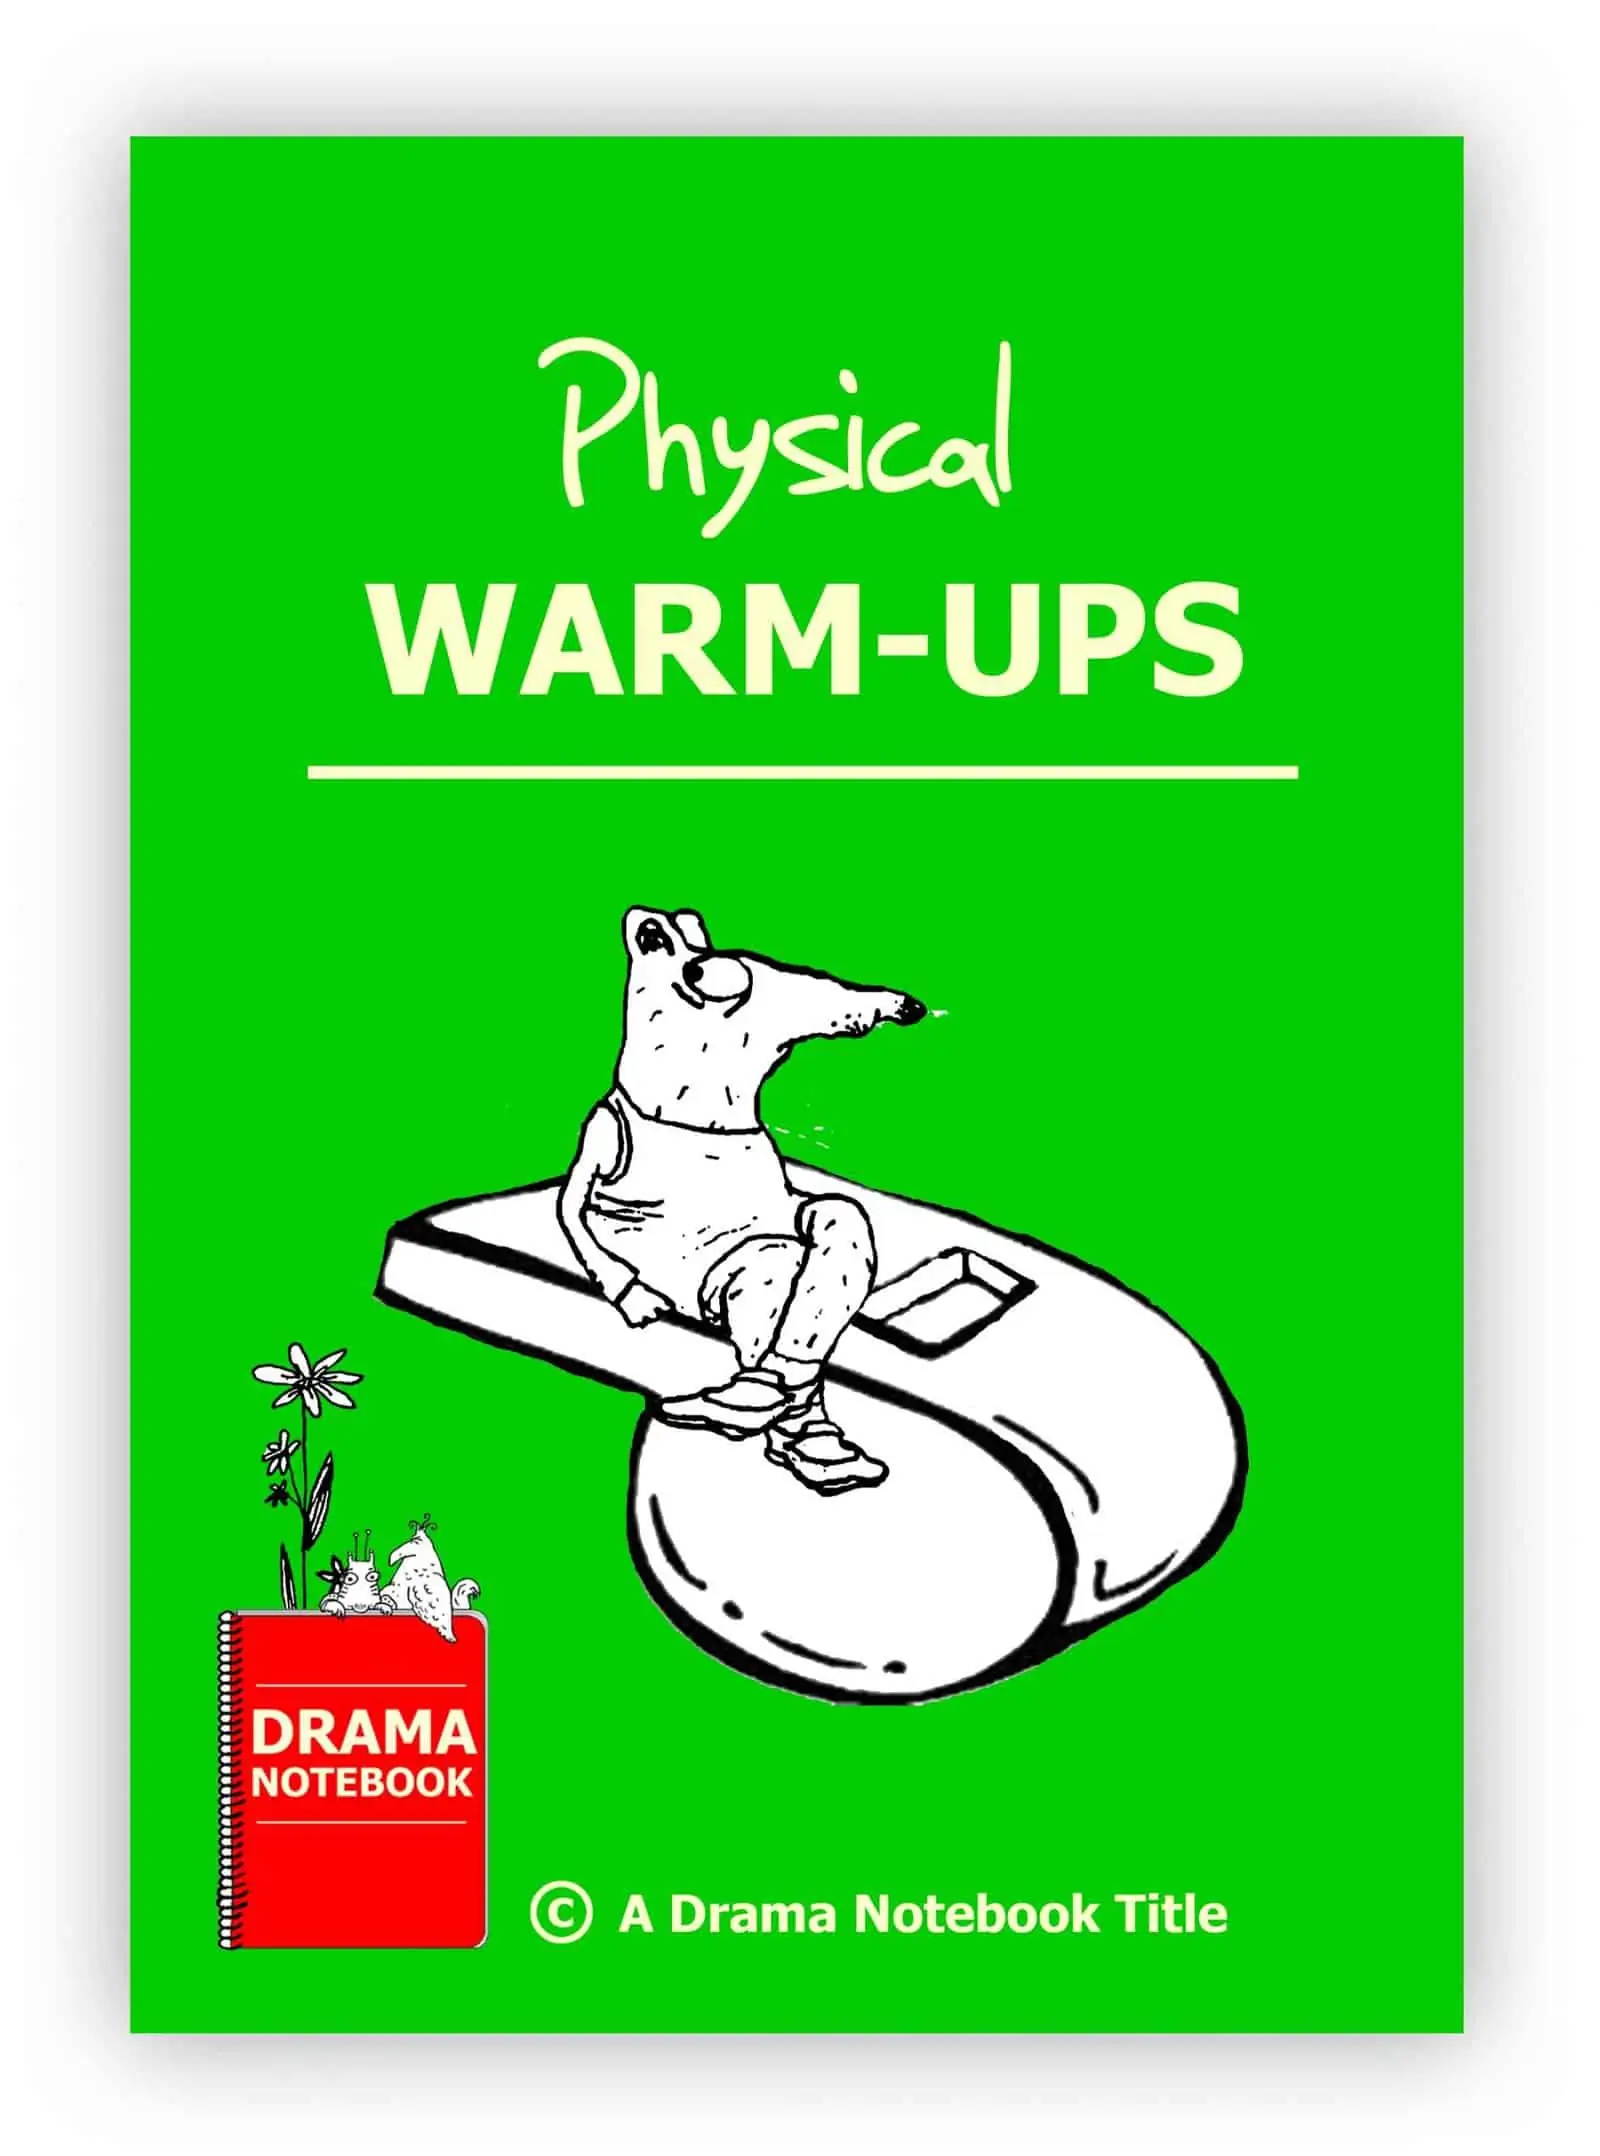 Physical Warm-ups for Drama Class